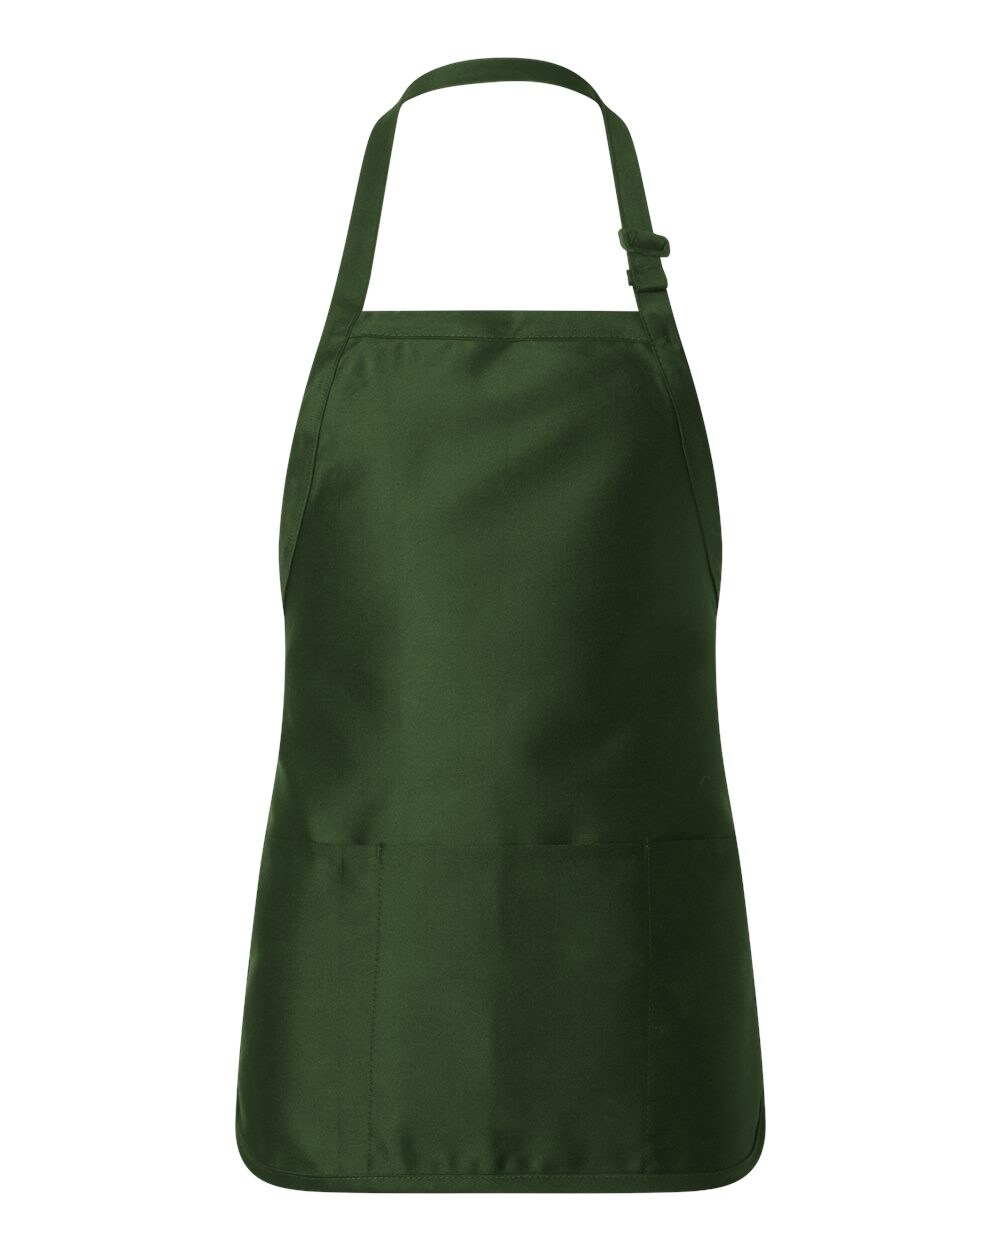 Q-Tees® Full-Length Apron with Pouch Pocket